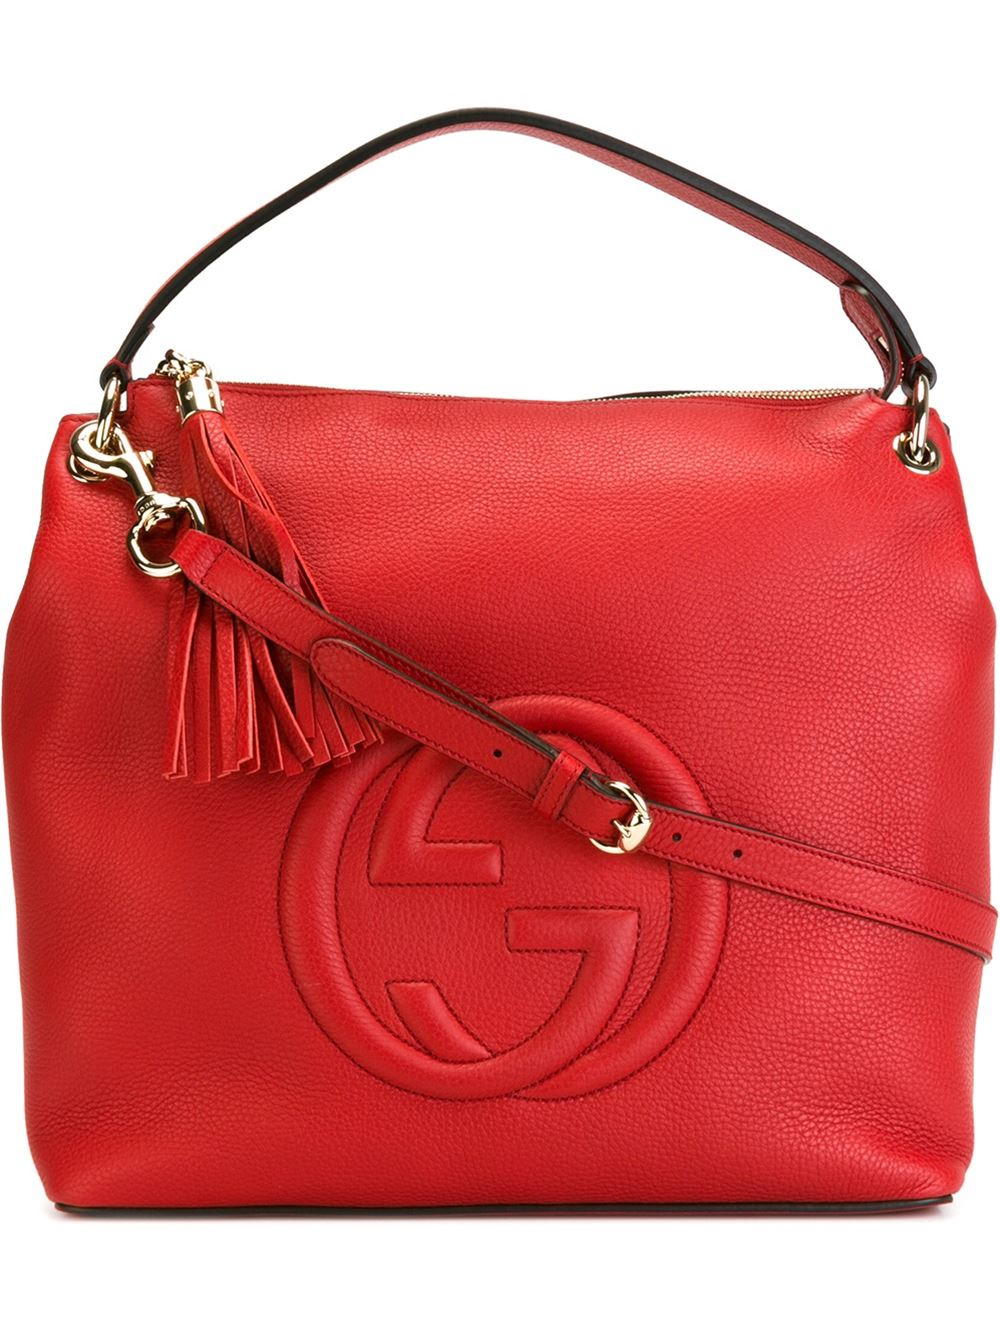 Lyst - Gucci Soho Bag in Red